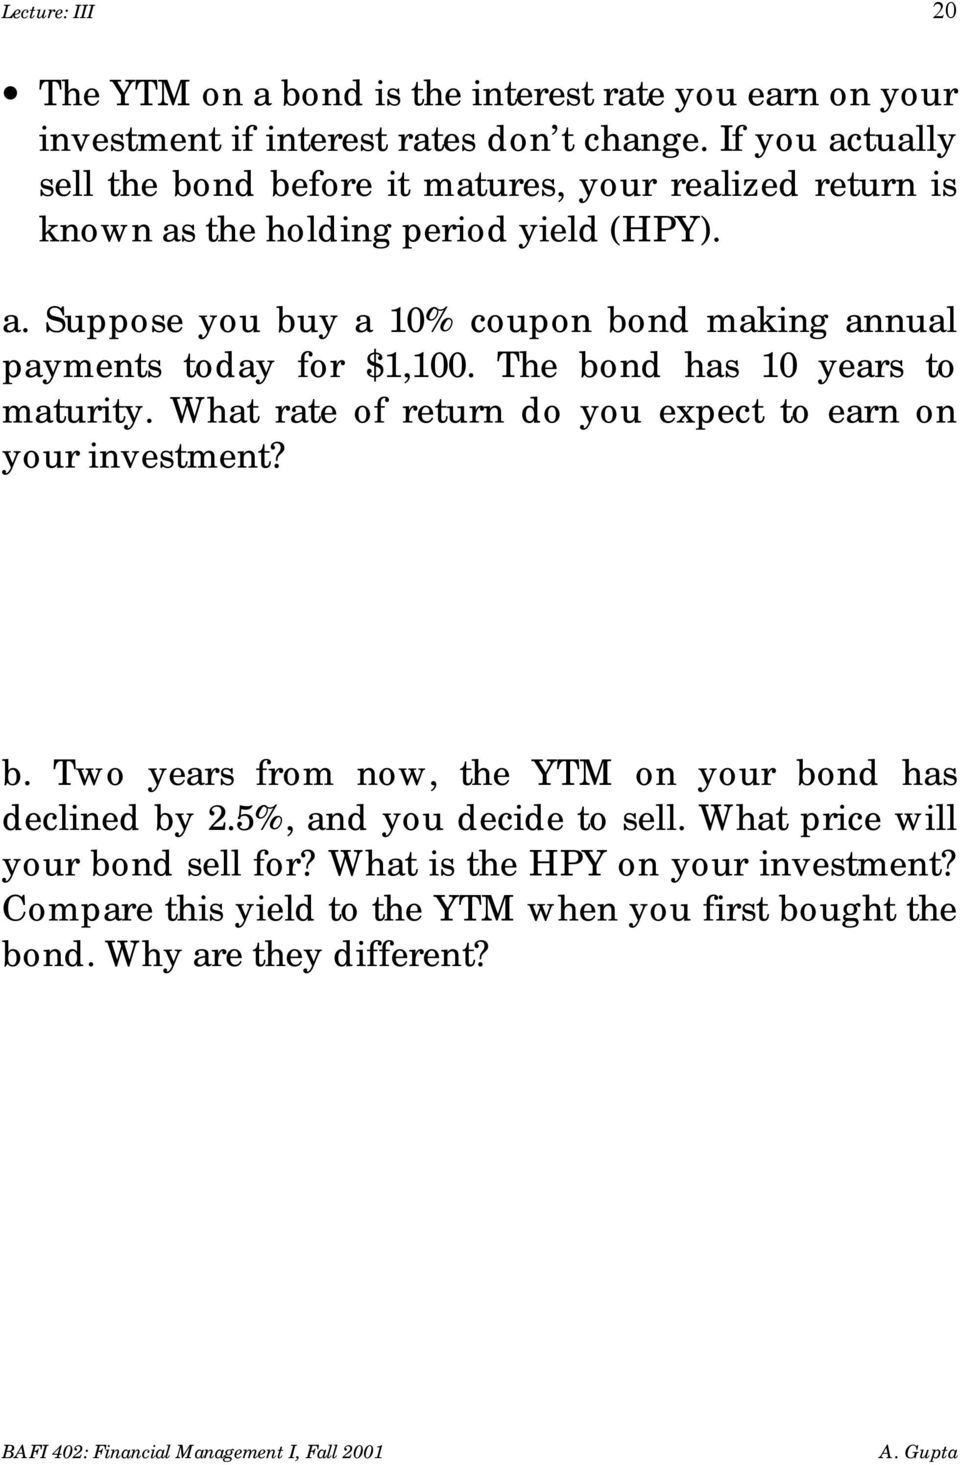 The bond has 10 years to maturity. What rate of return do you expect to earn on your investment? b. Two years from now, the YTM on your bond has declined by 2.